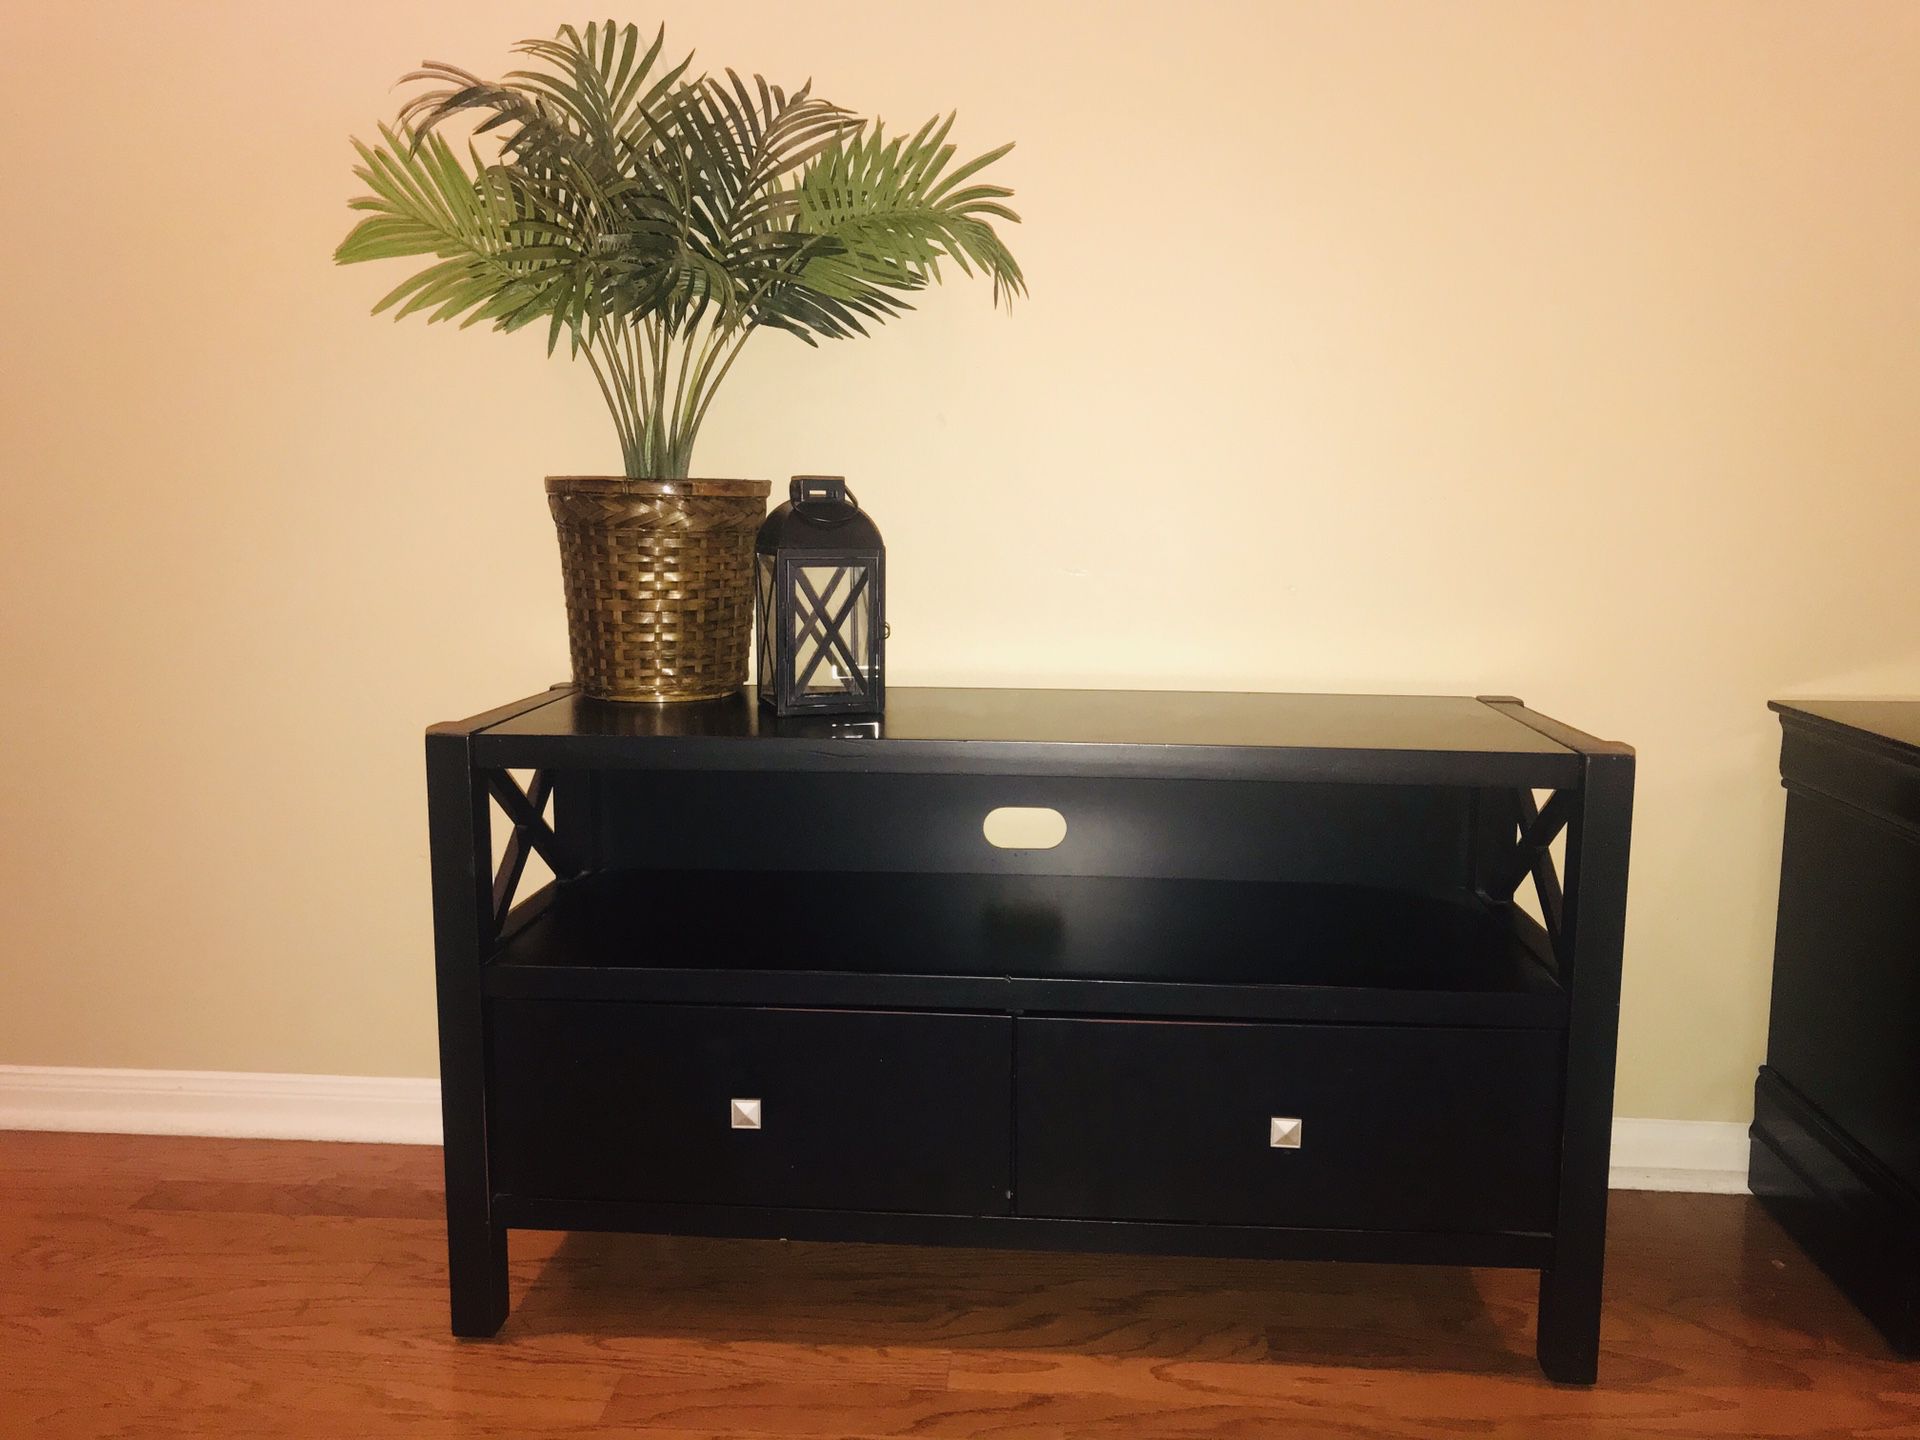 Beautiful dark wood entertainment center/ tv stand with drawers